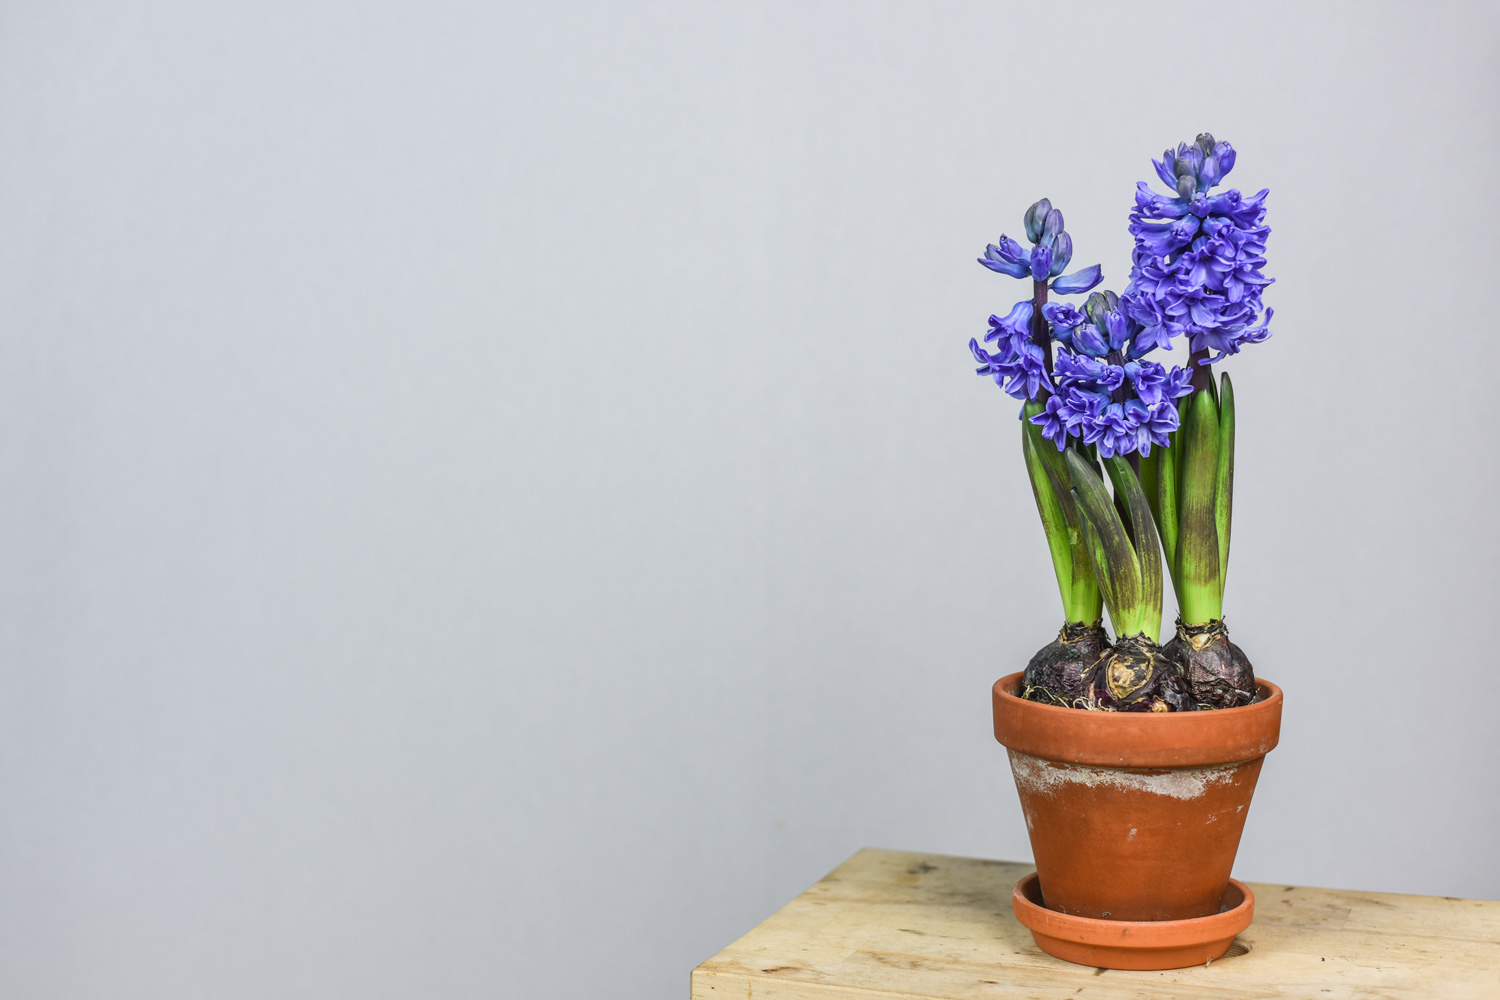 Blue hyacinth in a flower pot, early bloomers in spring in a clay pot